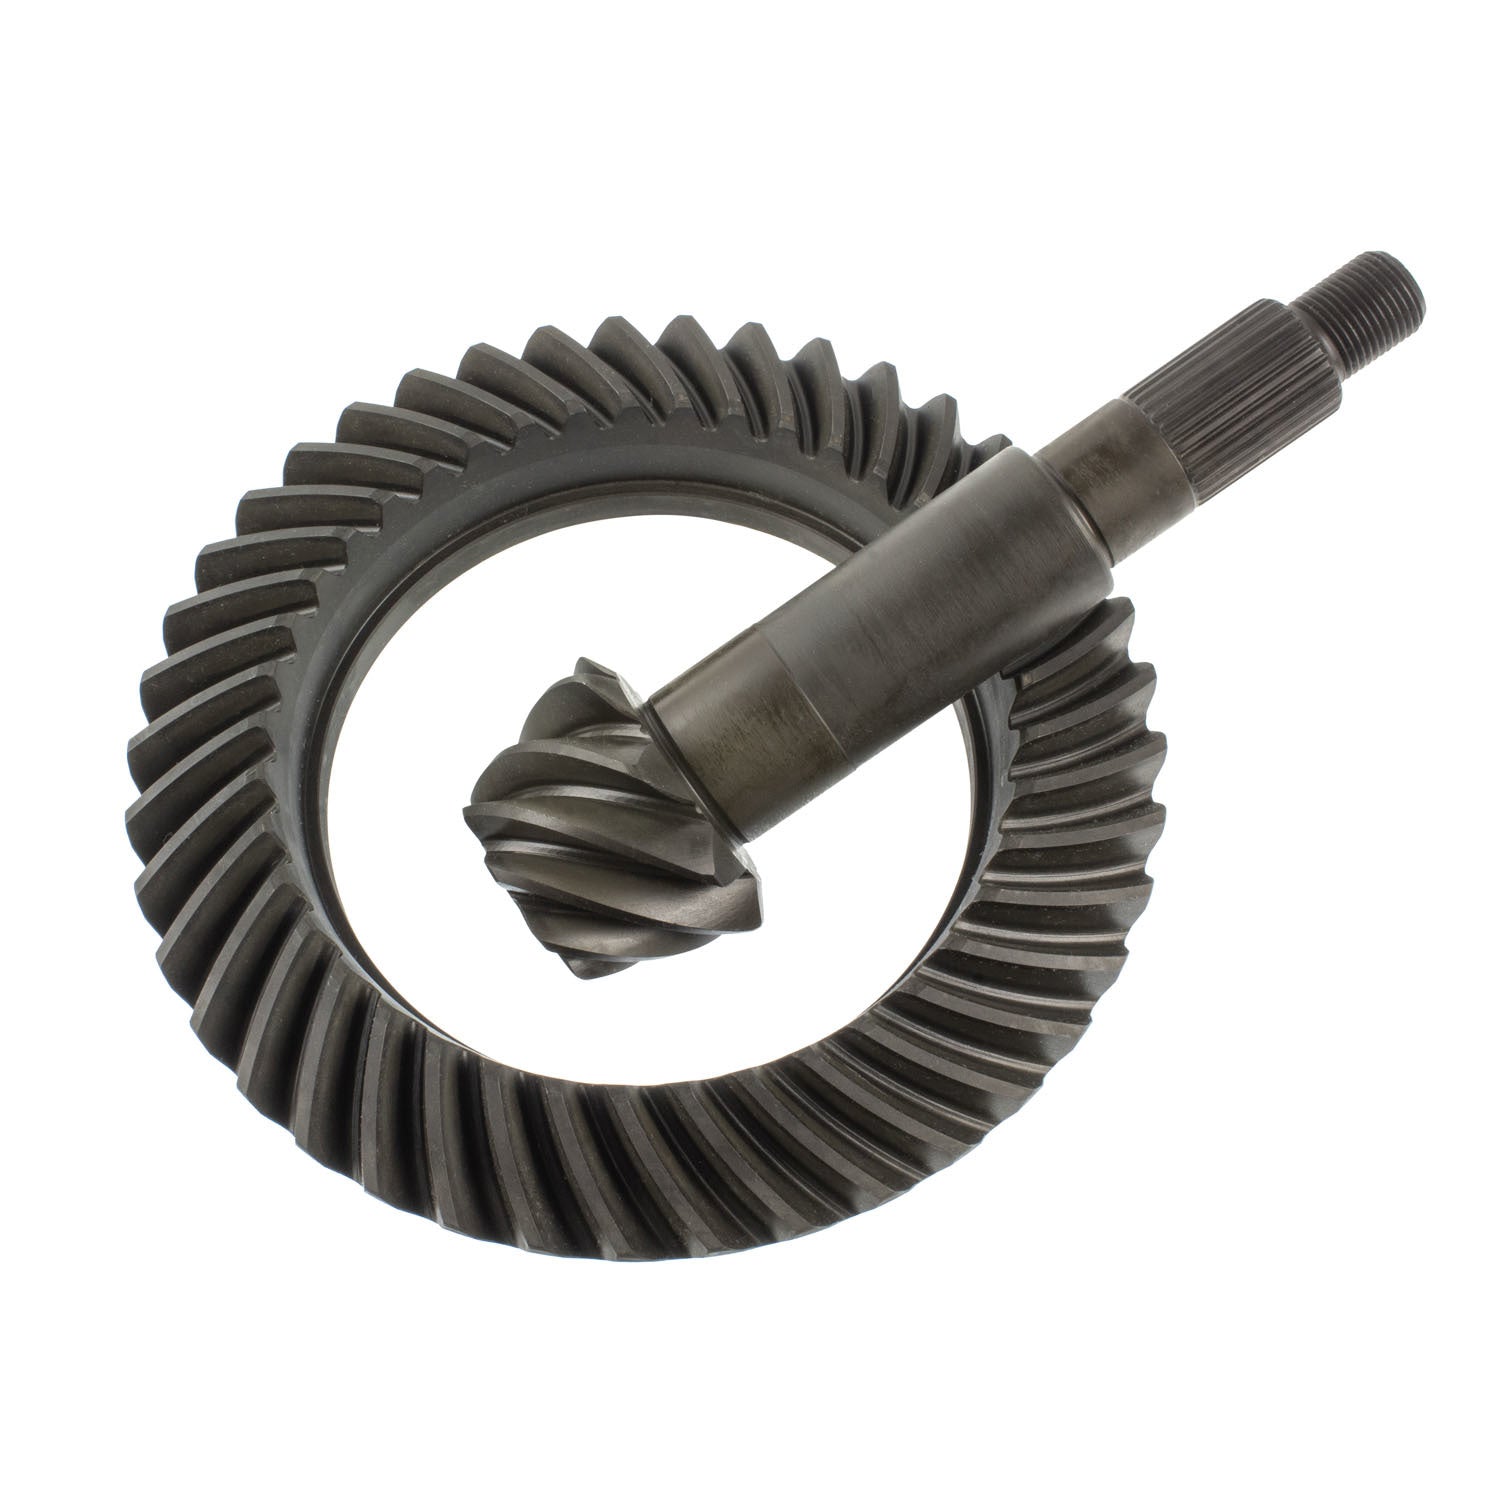 Richmond Ring & Pinion Dana 60 5.13 Ratio Reverse Cut Differentials and Rear-End Components Ring and Pinion Gears main image